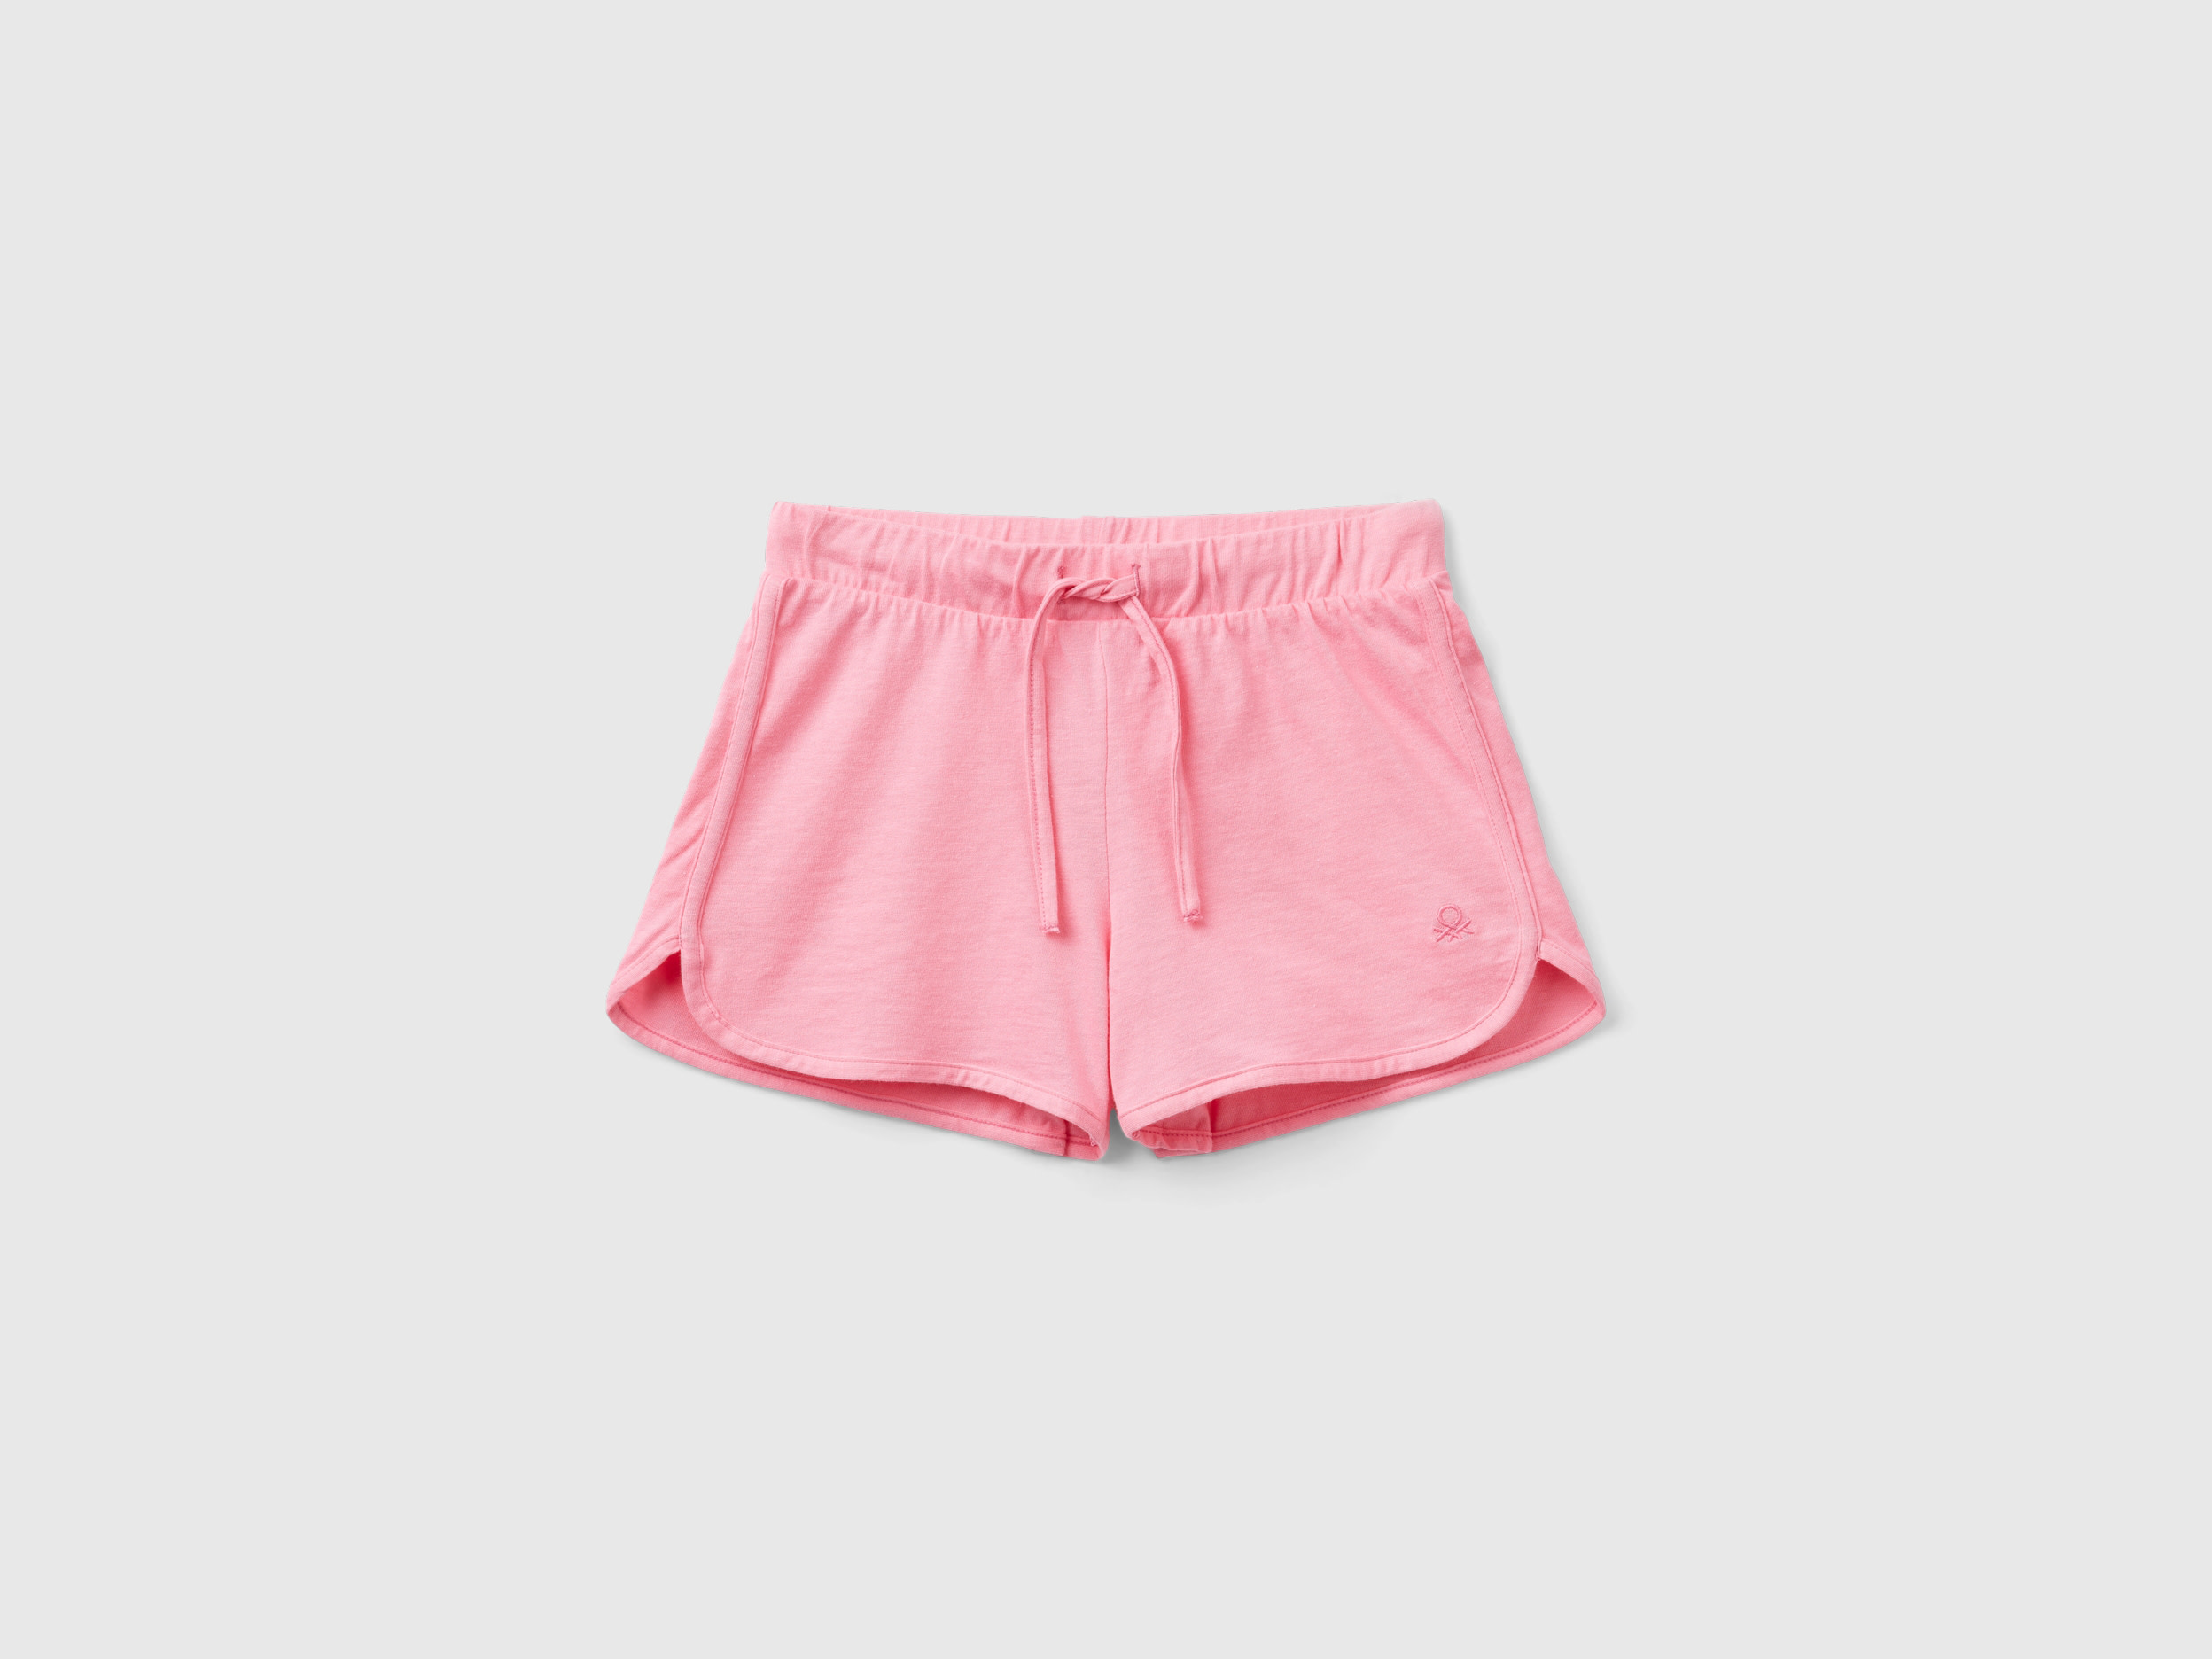 Image of Benetton, Runner Style Shorts In Organic Cotton, size S, Pink, Kids